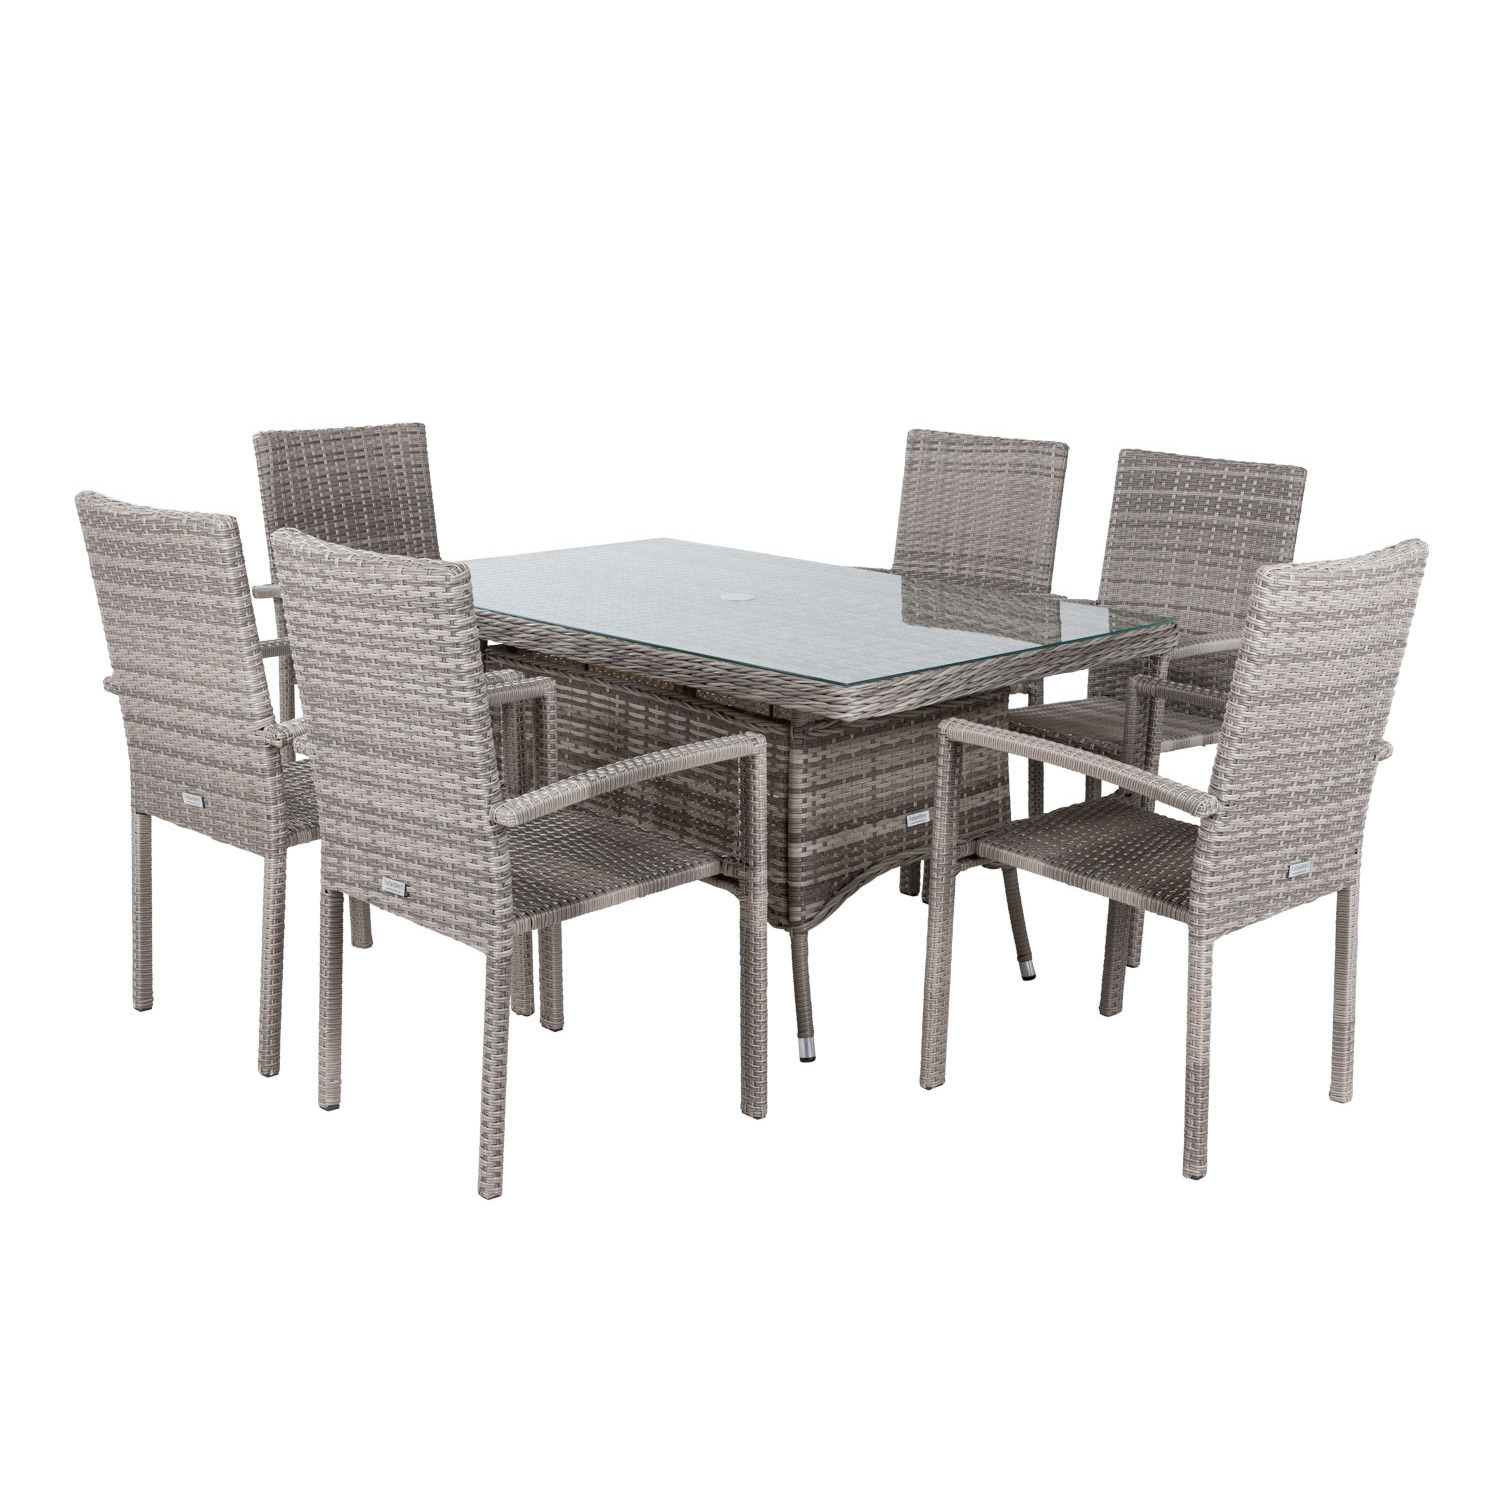 6 Seat Rattan Garden Dining Set With Small Rectangular Table in Grey - Rio - Rattan Direct